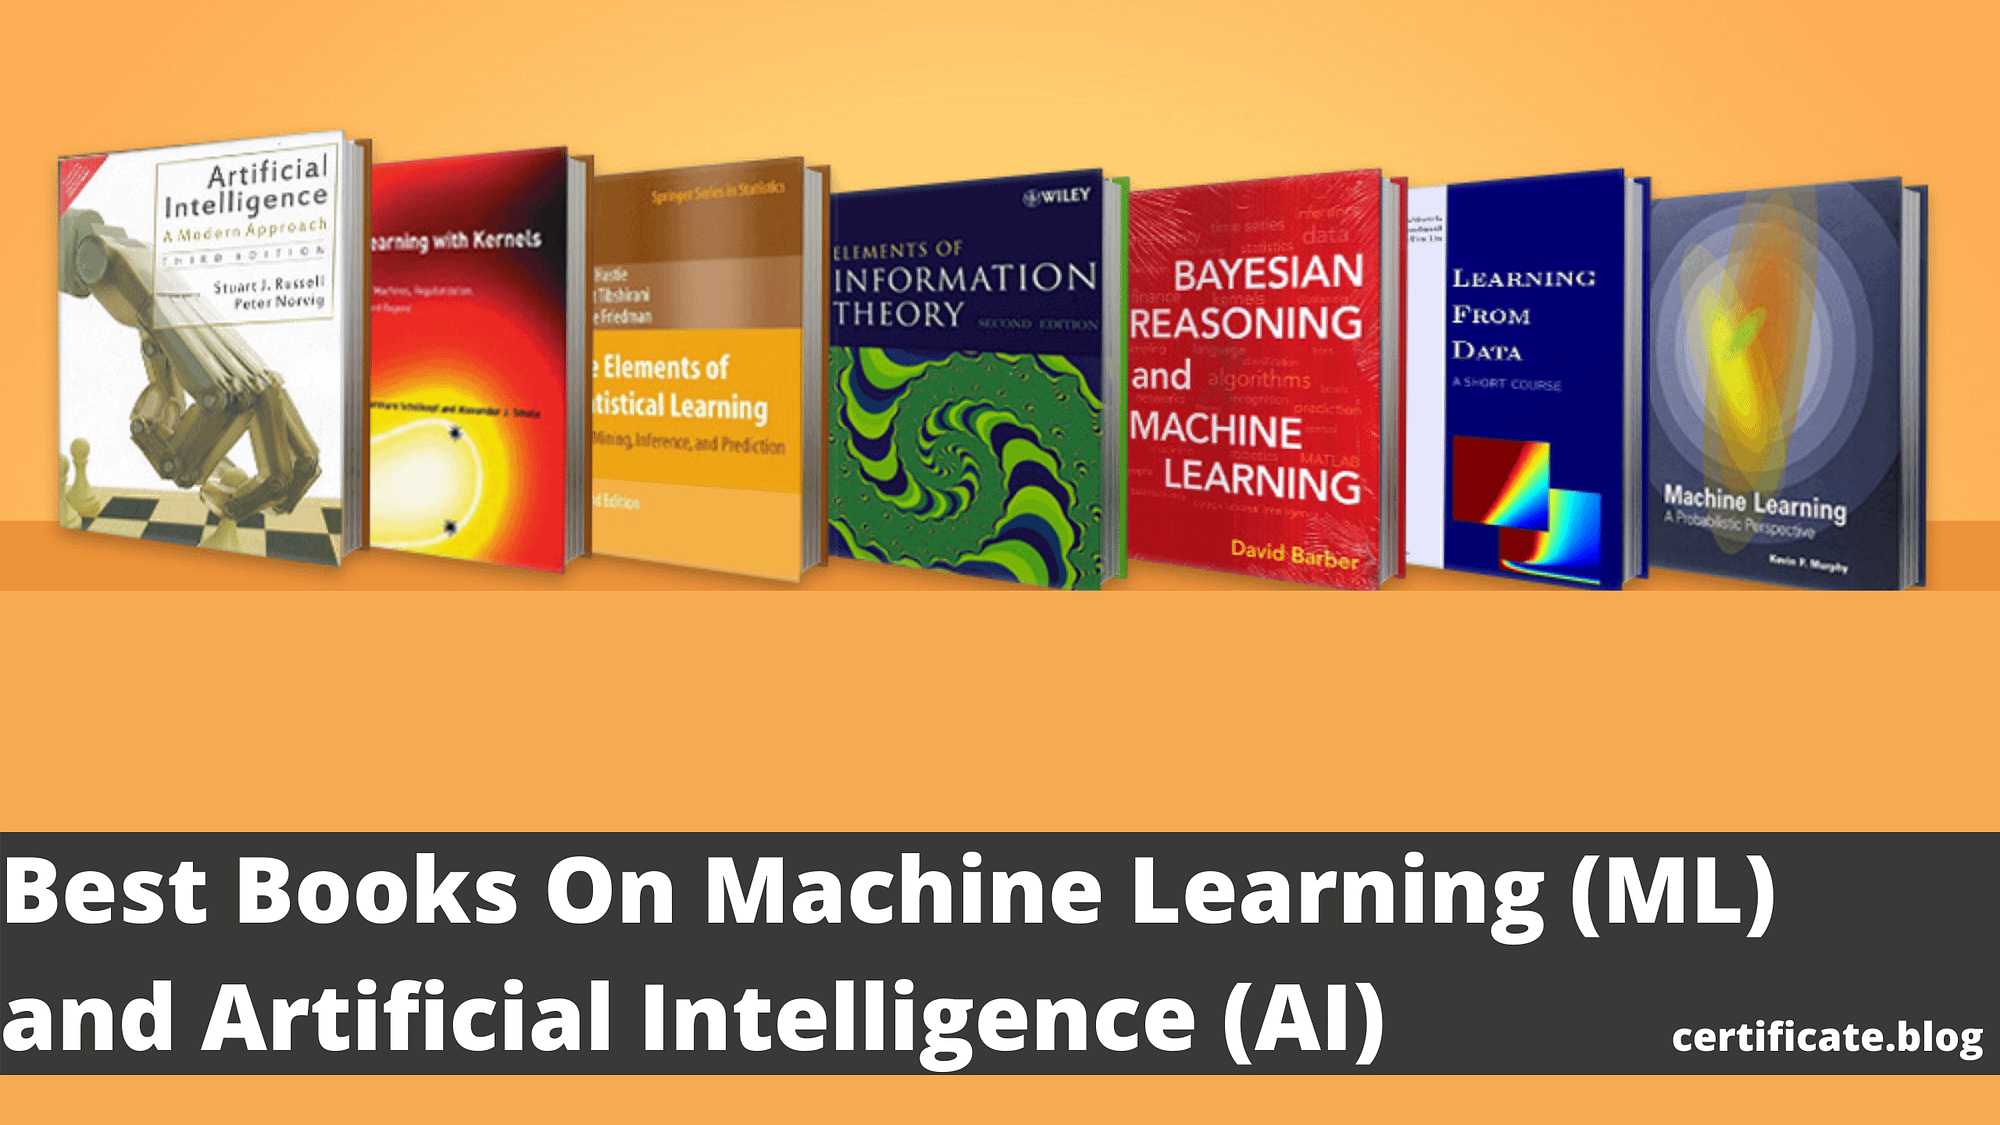 Compulsory Books On Machine Learning (ML) and Artificial Intelligence (AI)